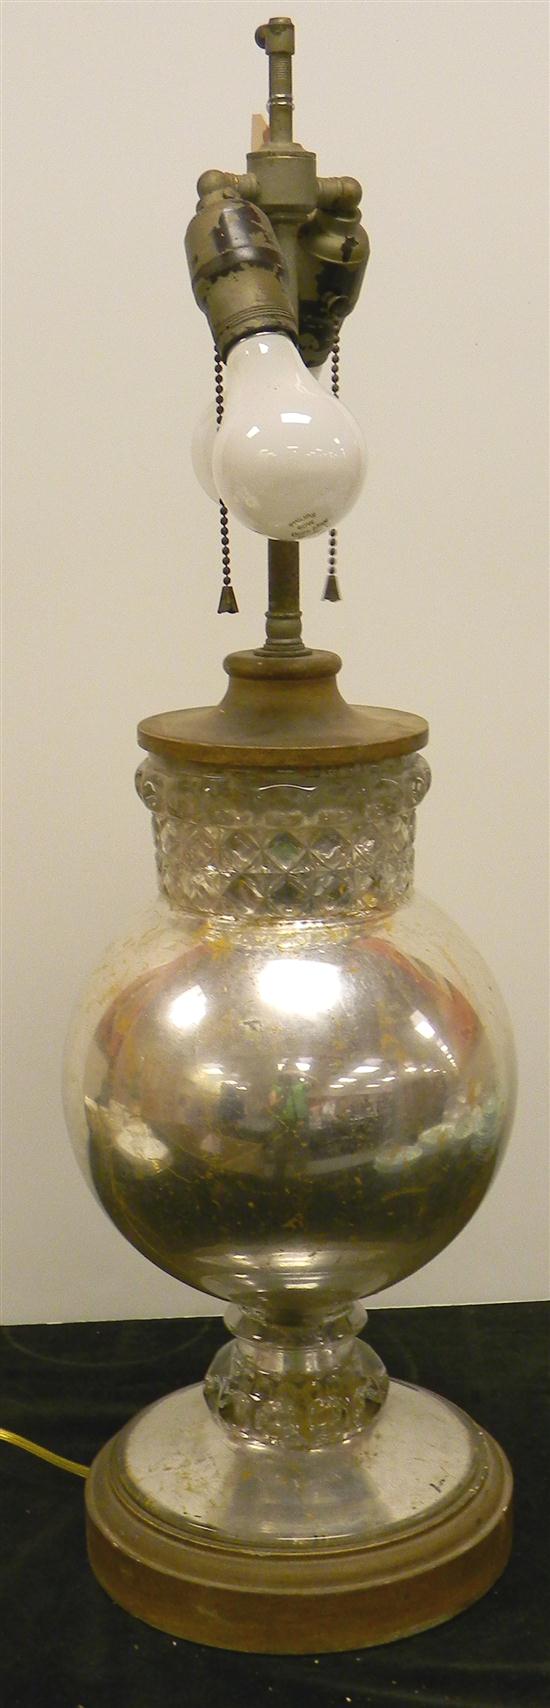 Mercury lined glass lamp with two